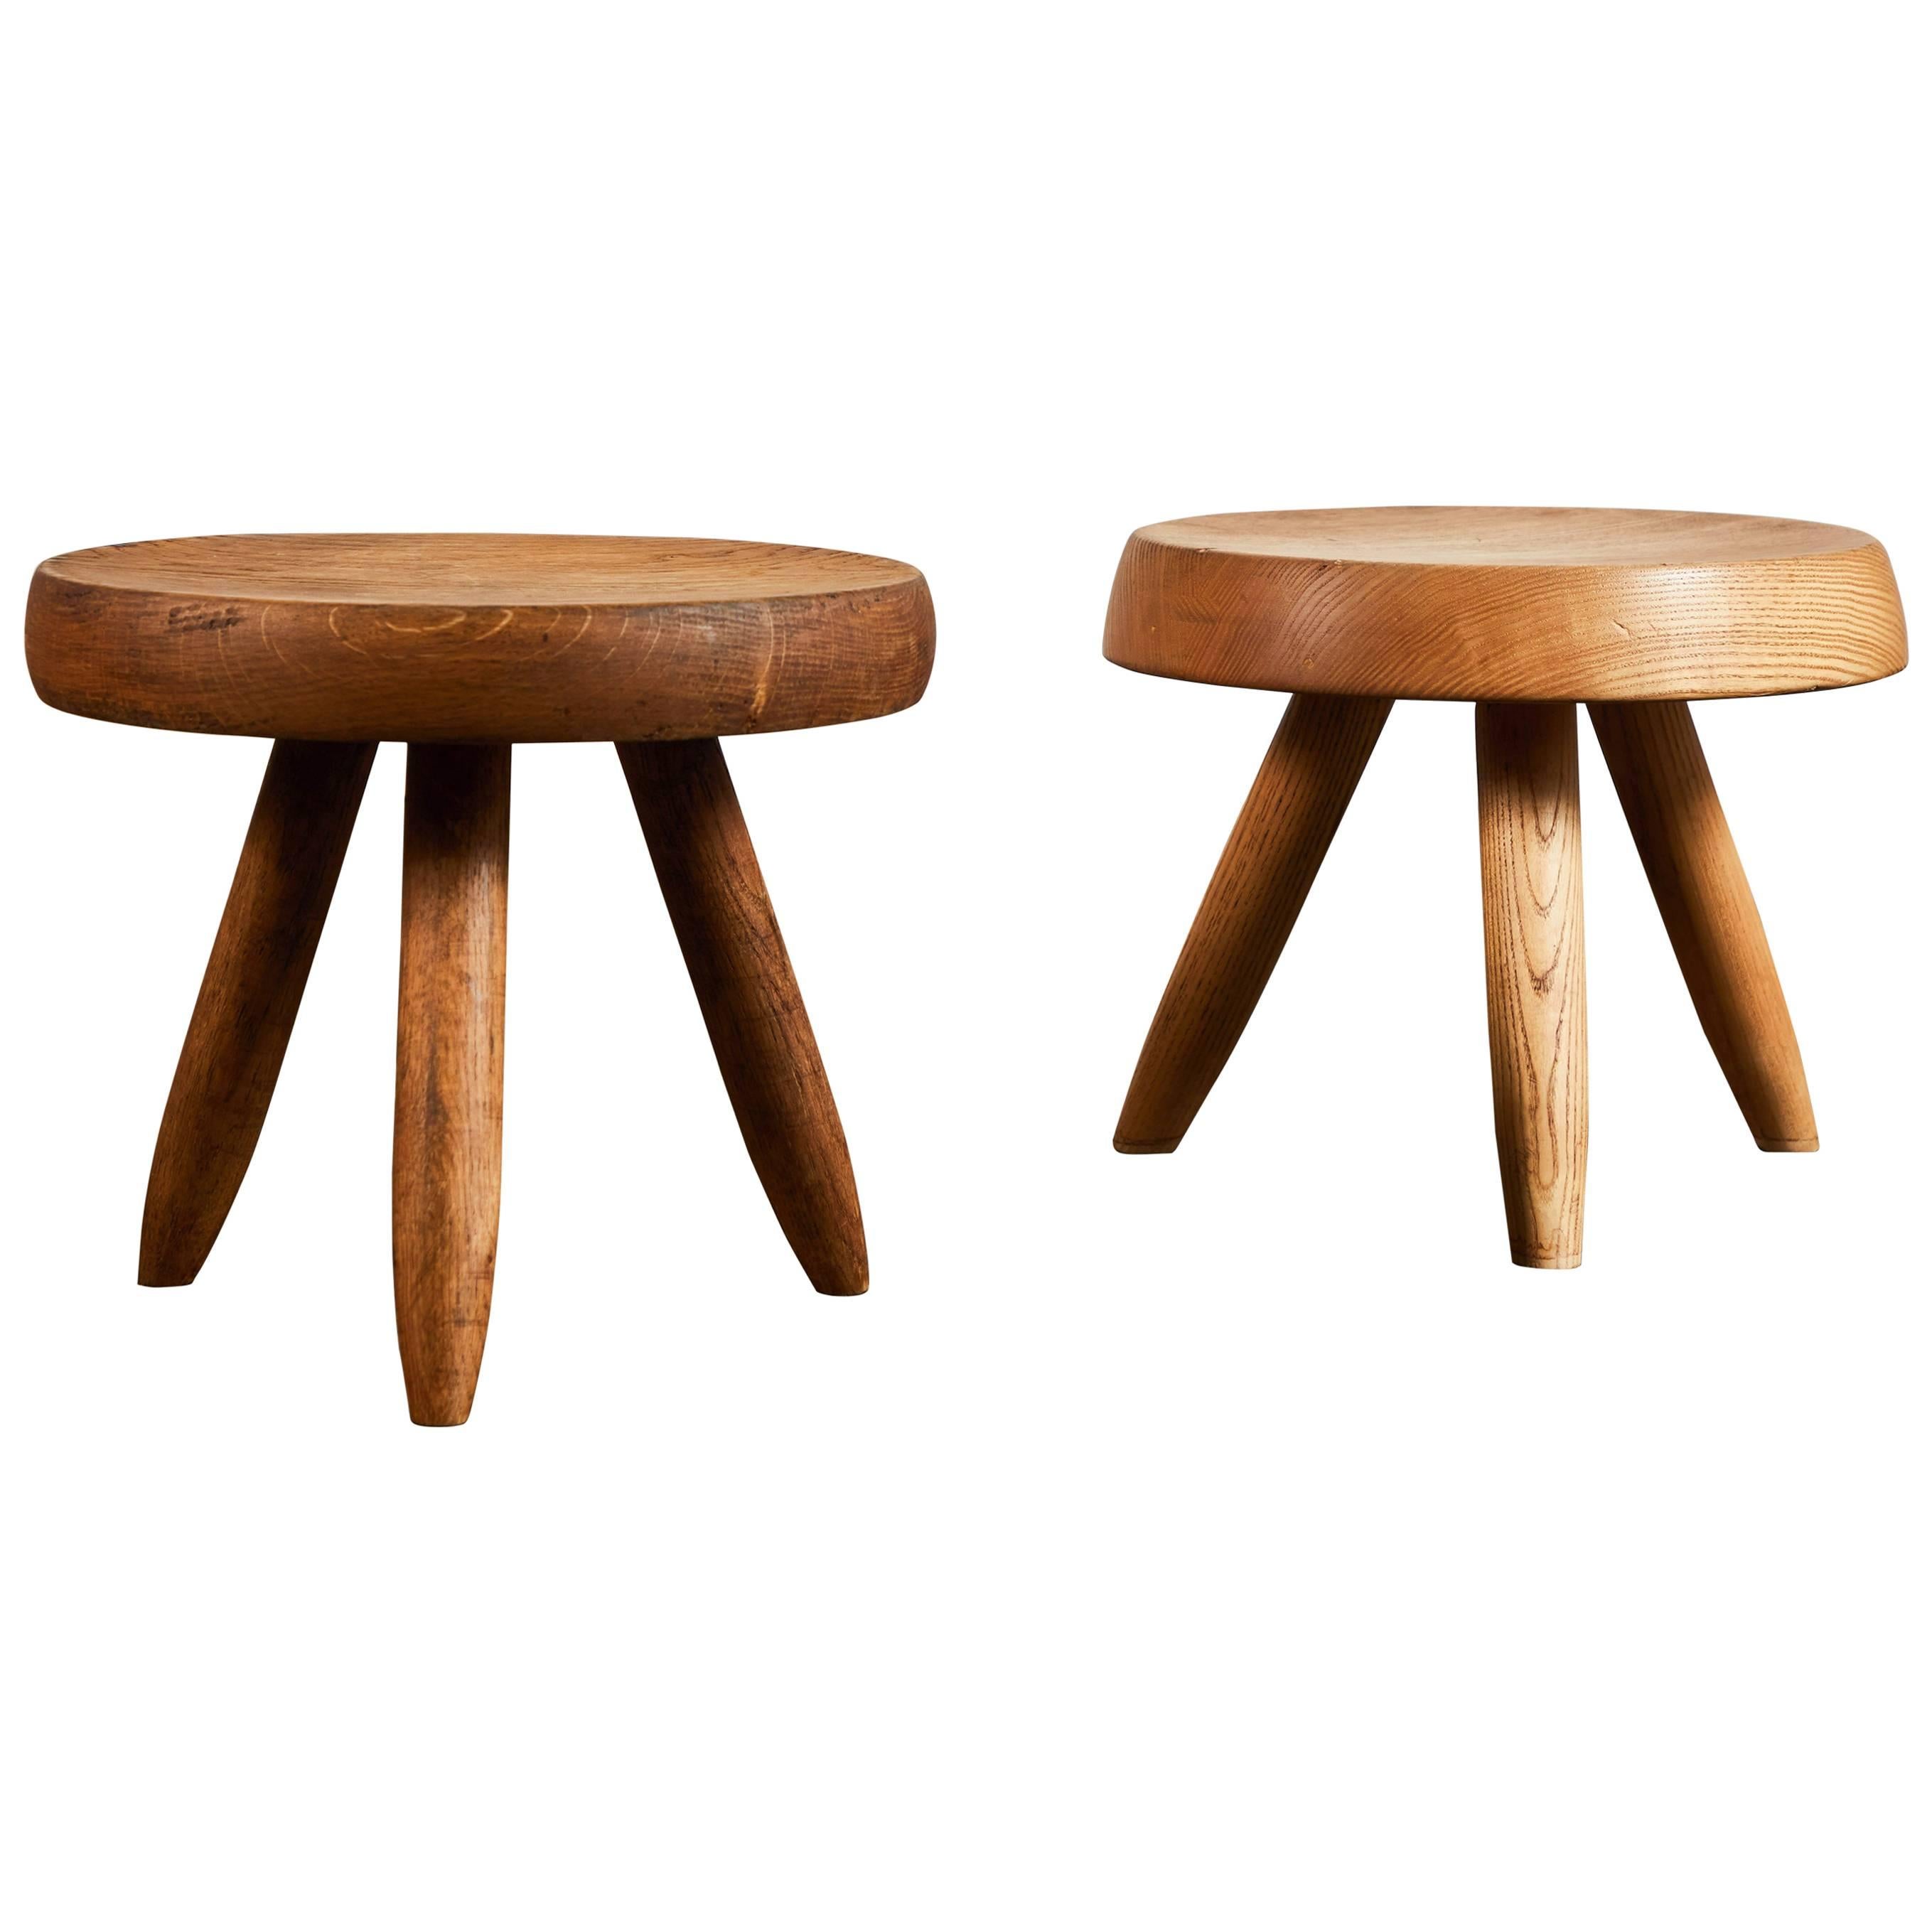 Stool by Charlotte Perriand for Galerie Steph Simon